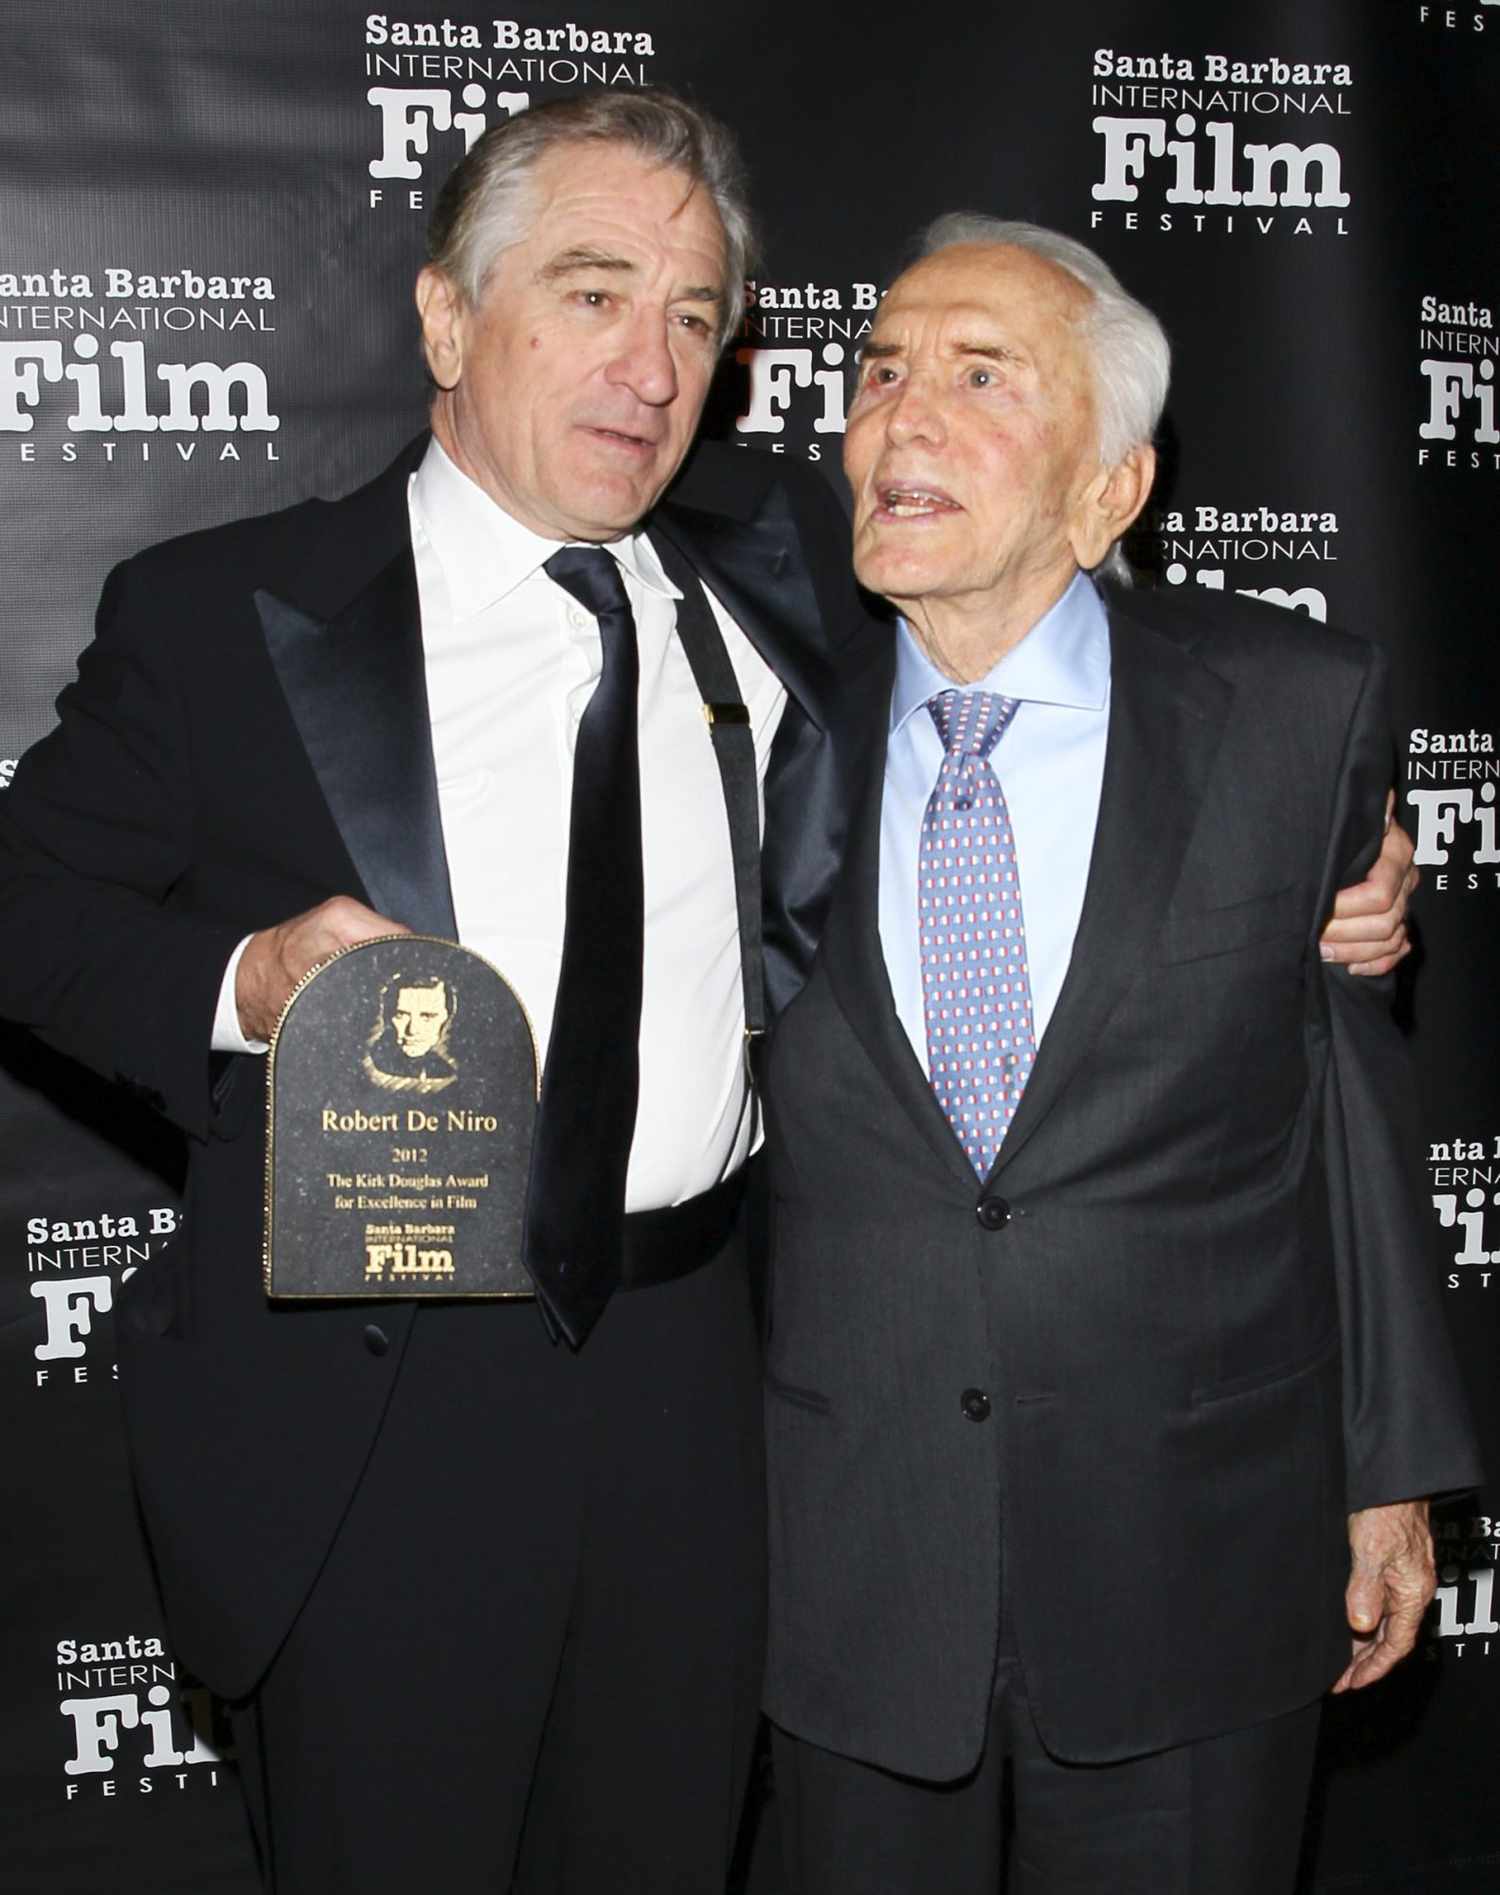 Robert De Niro and Kirk Douglas attend the 7th Annual Santa Barbara International Film Festival where De Niro was honored with the Kirk Douglas Award For Excellence In Film on Dec. 8, 2012